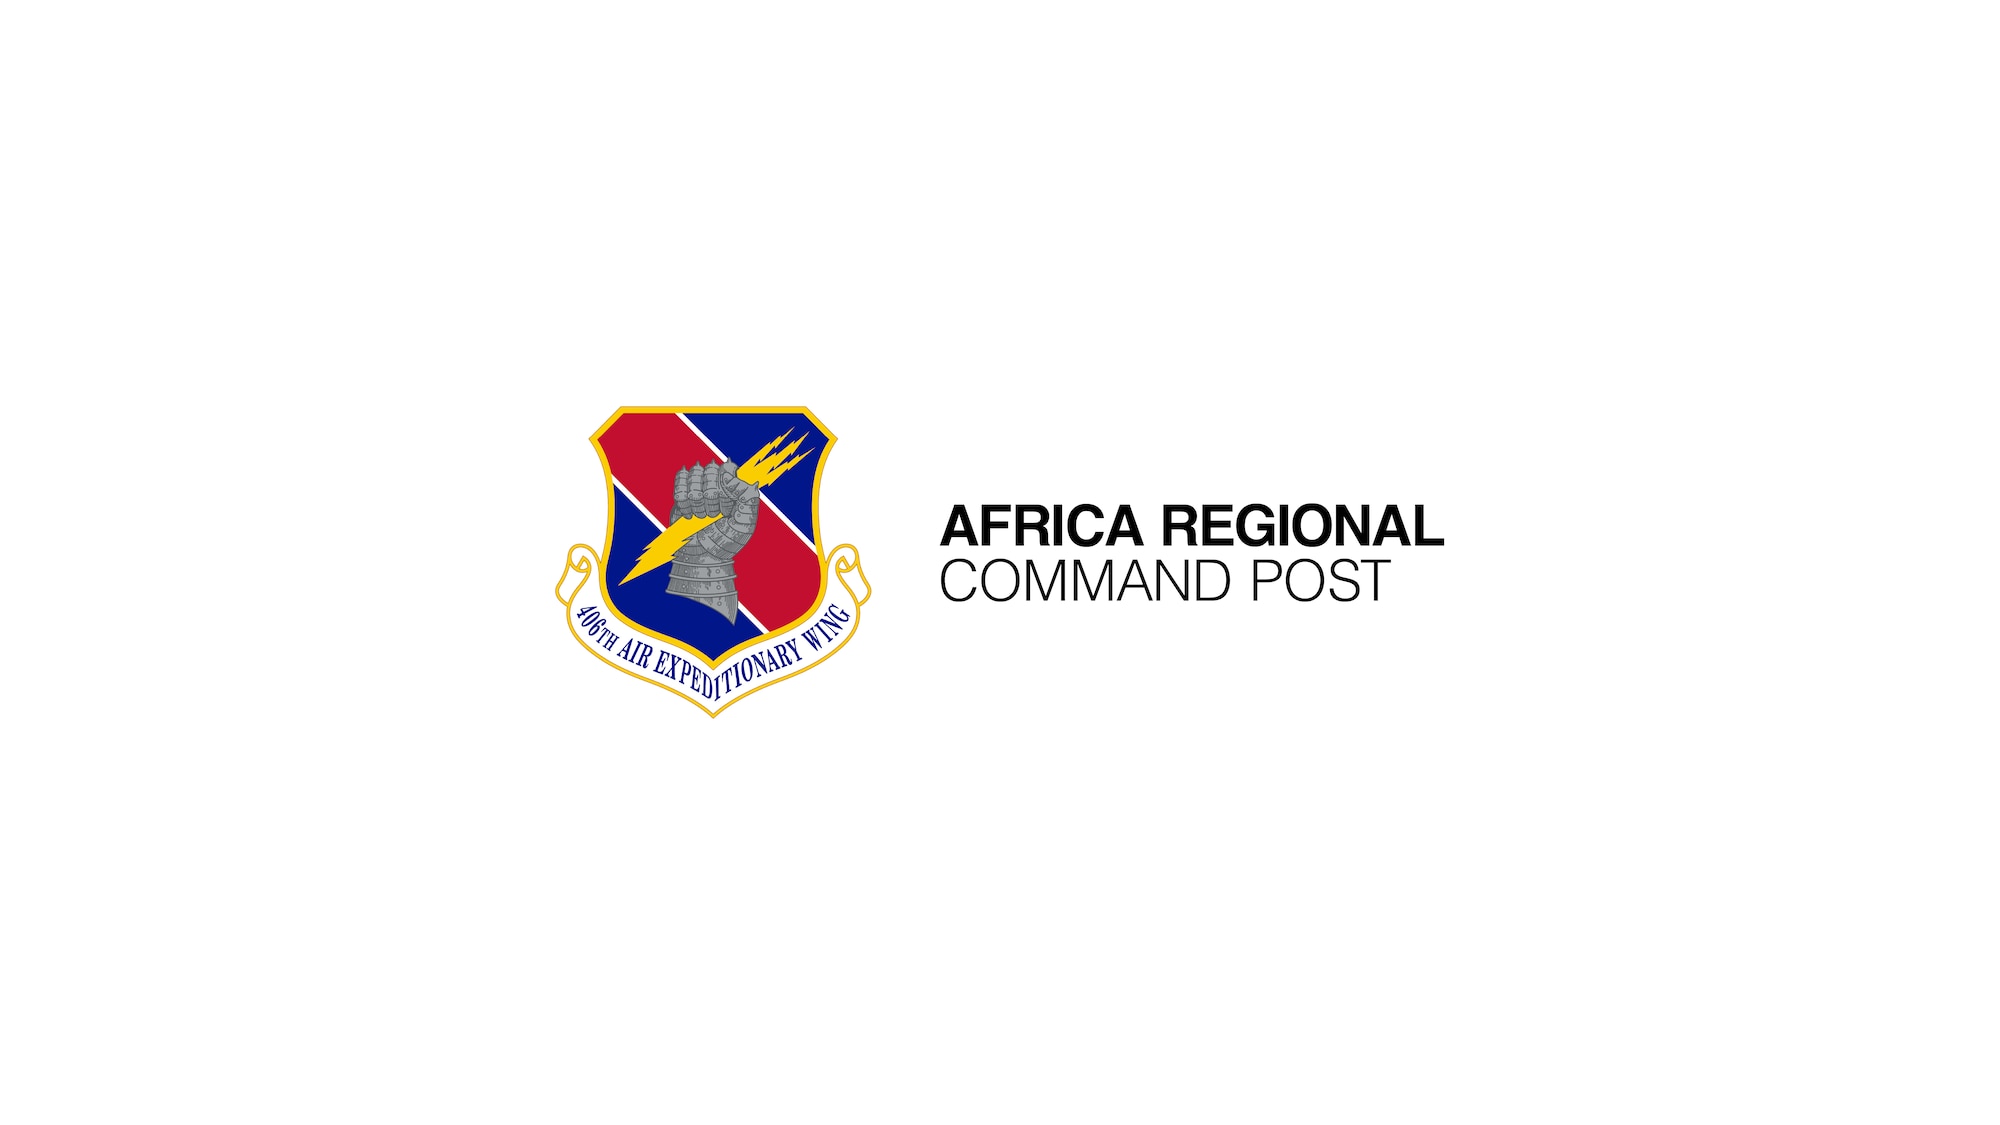 Graphic of the 406th Air Expeditionary Wing shield and text that reads "Africa Regional Command Post"